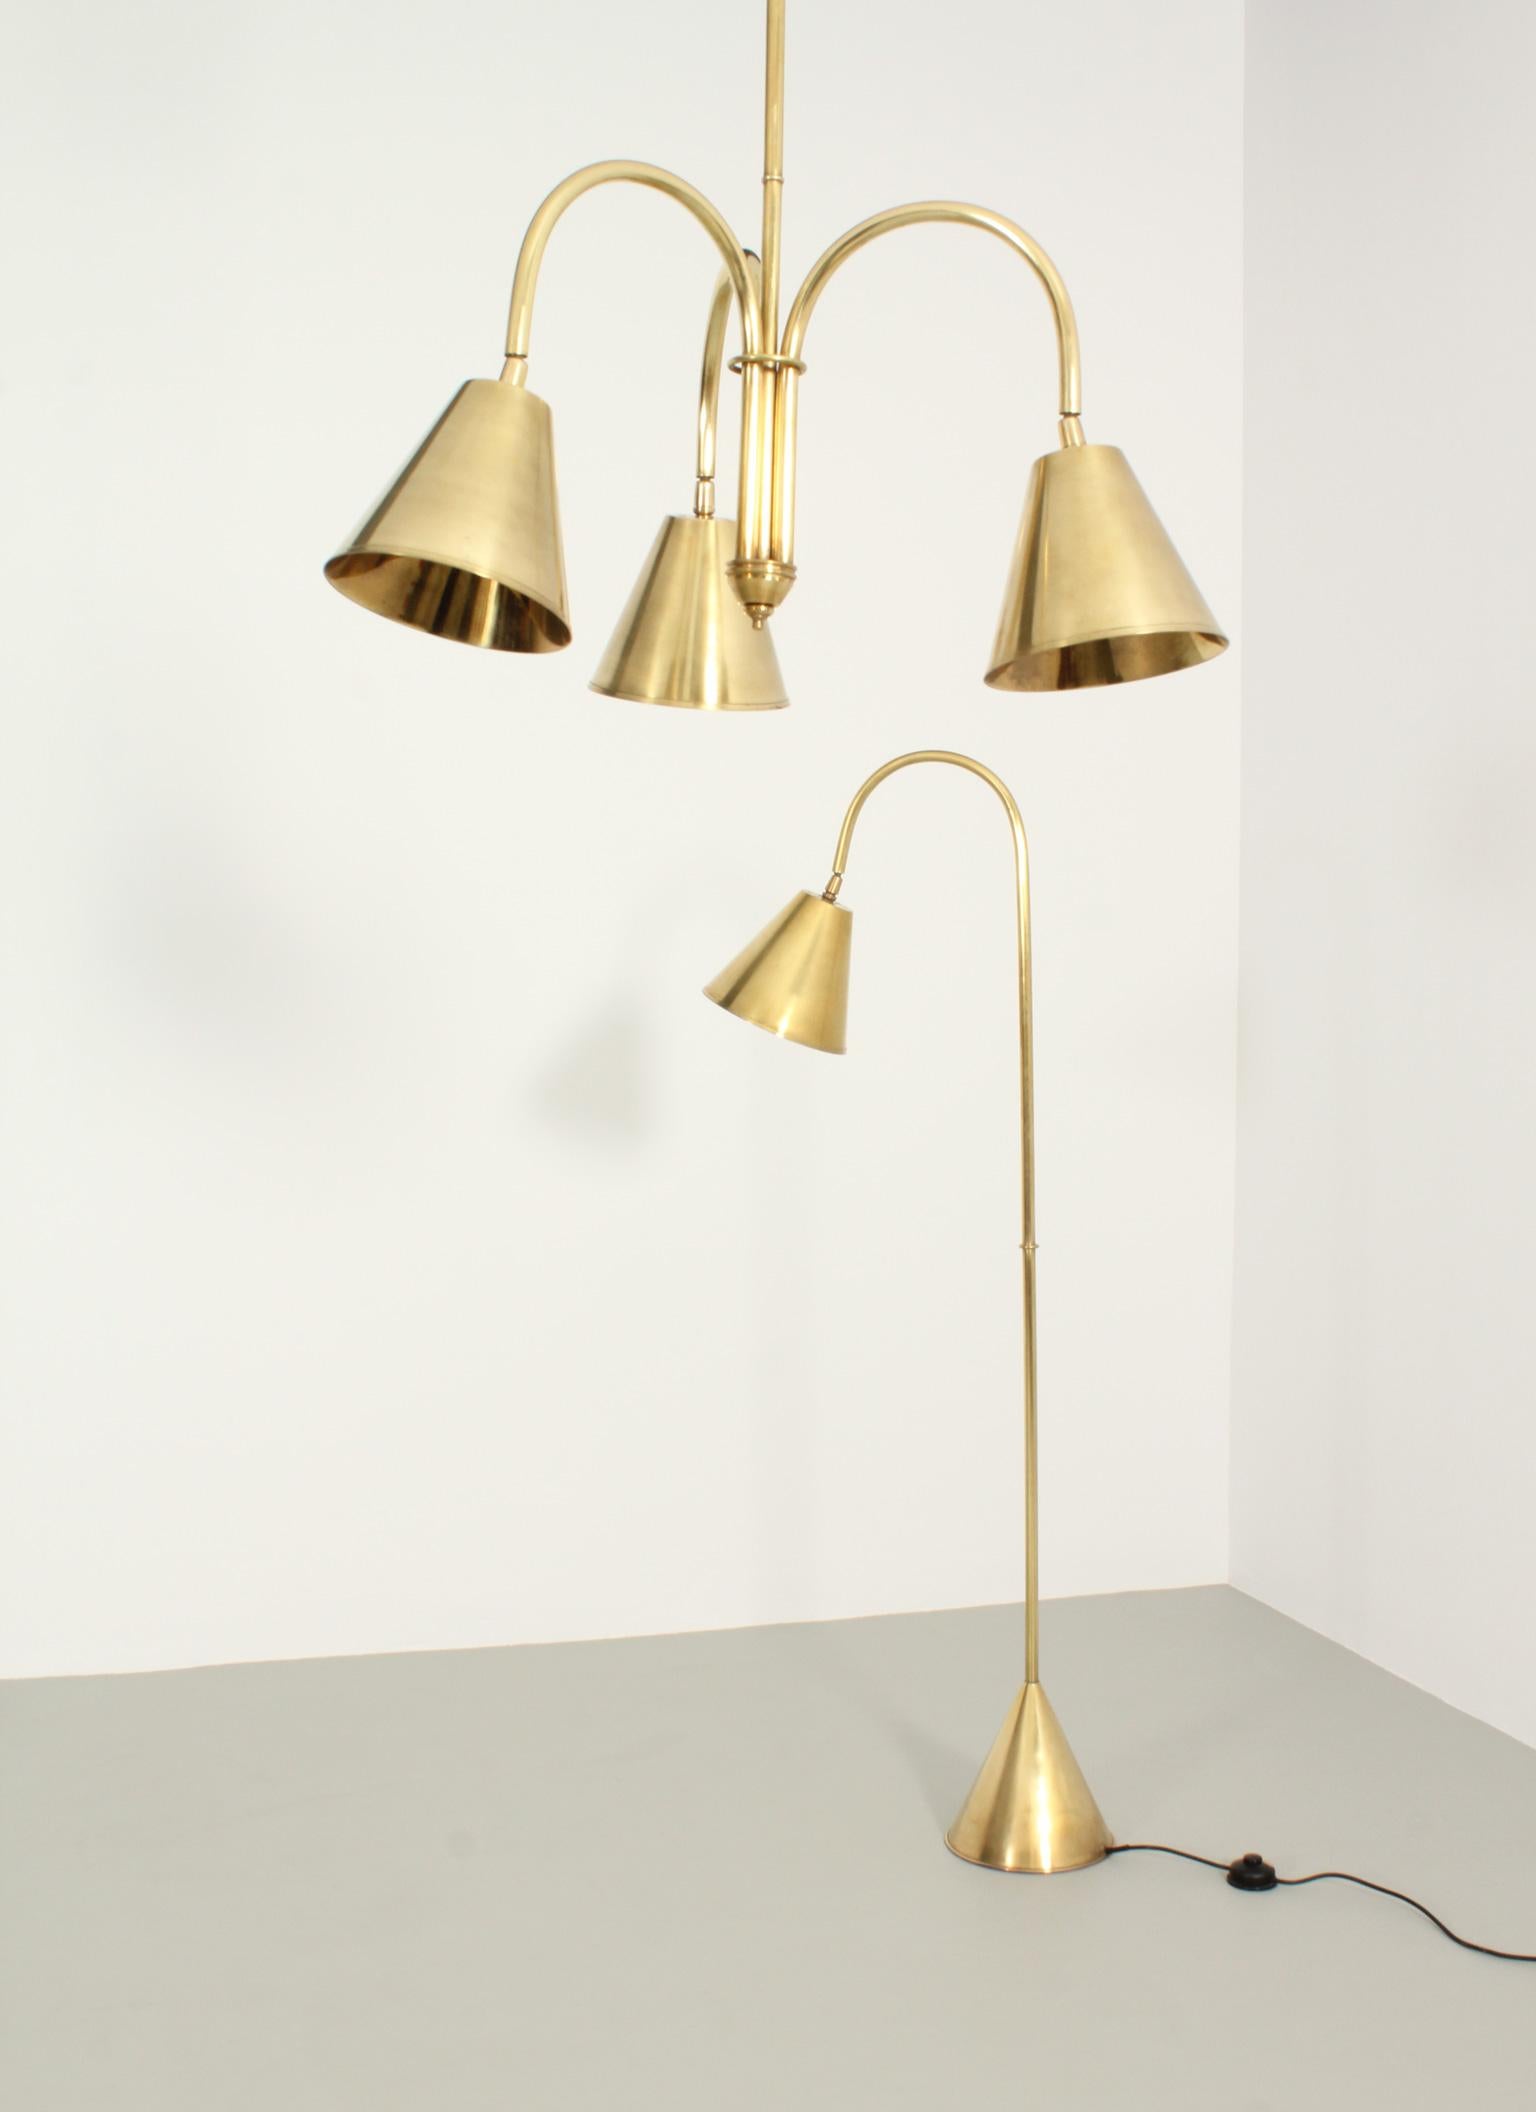 Brass Ceiling Lamp by Valenti, Spain 1950's For Sale 5